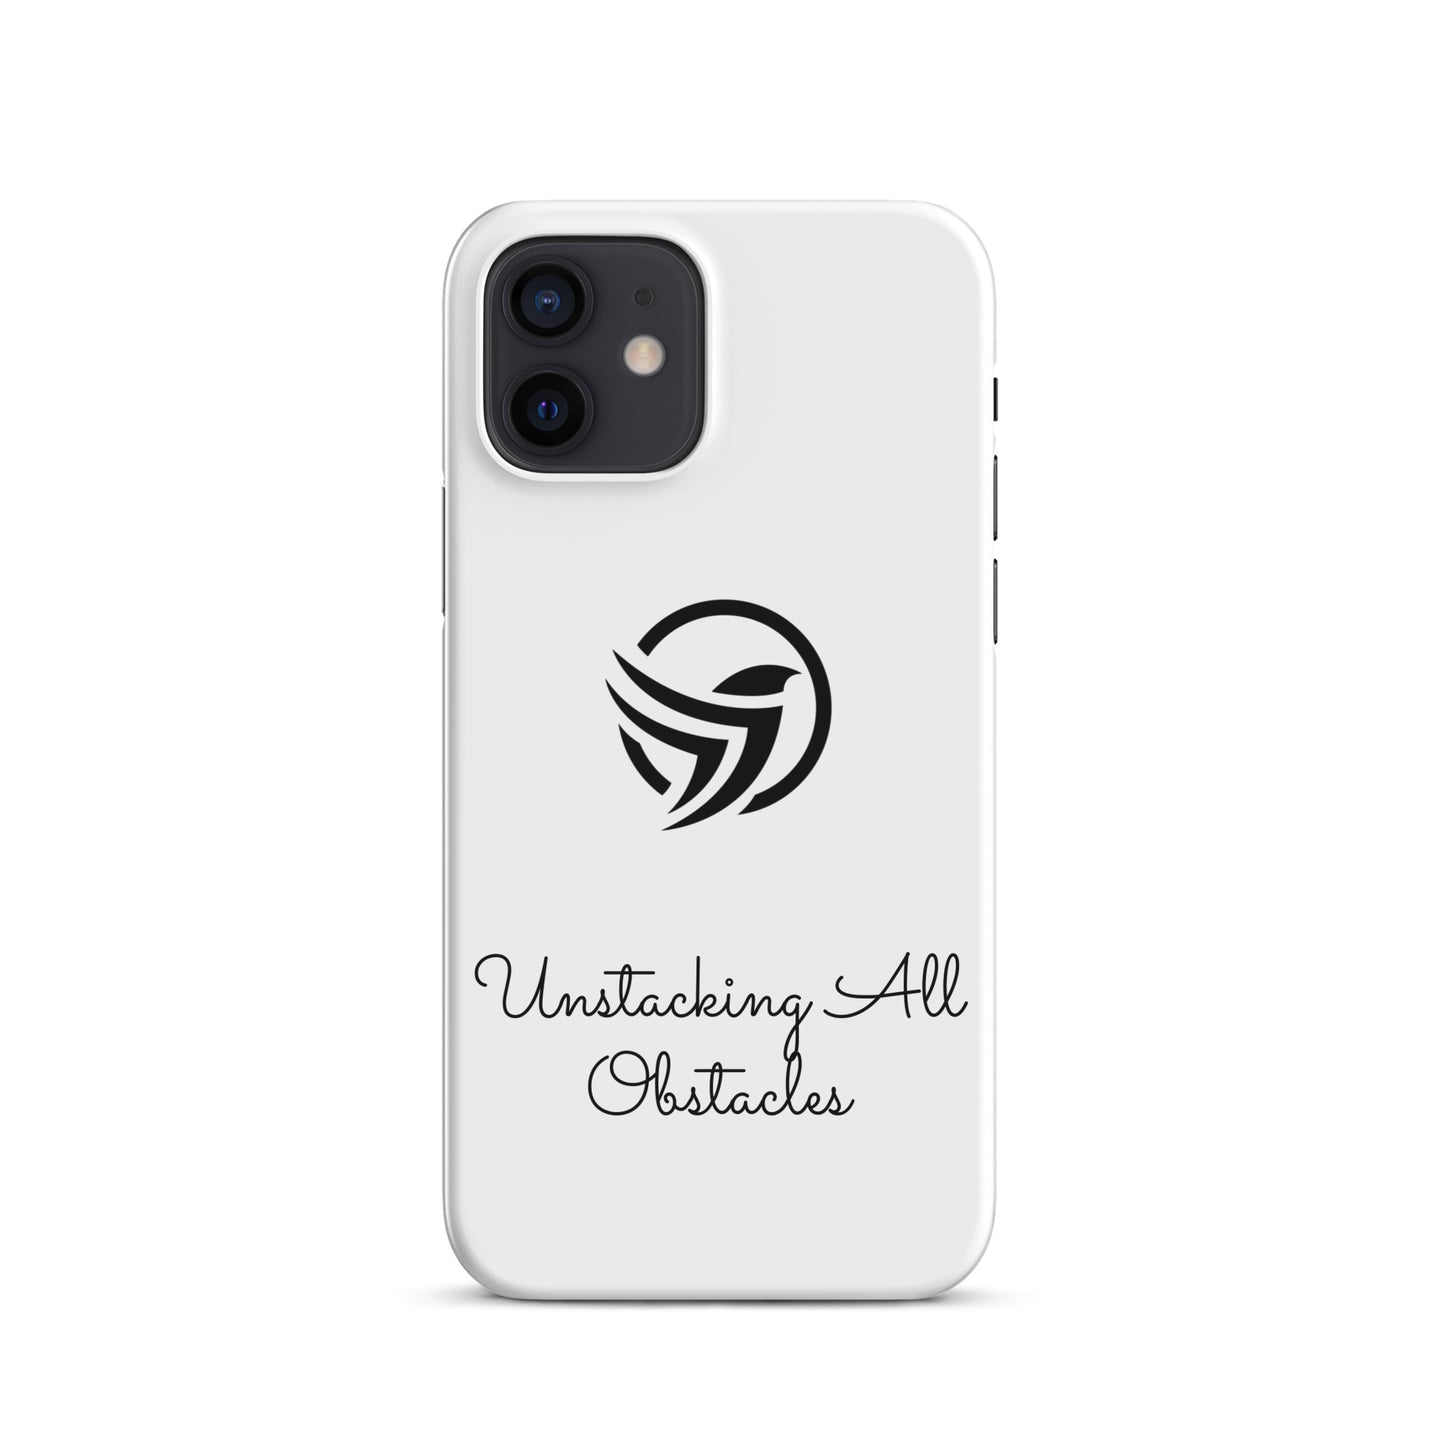 Unstacking All Obstacles Snap case for iPhone®